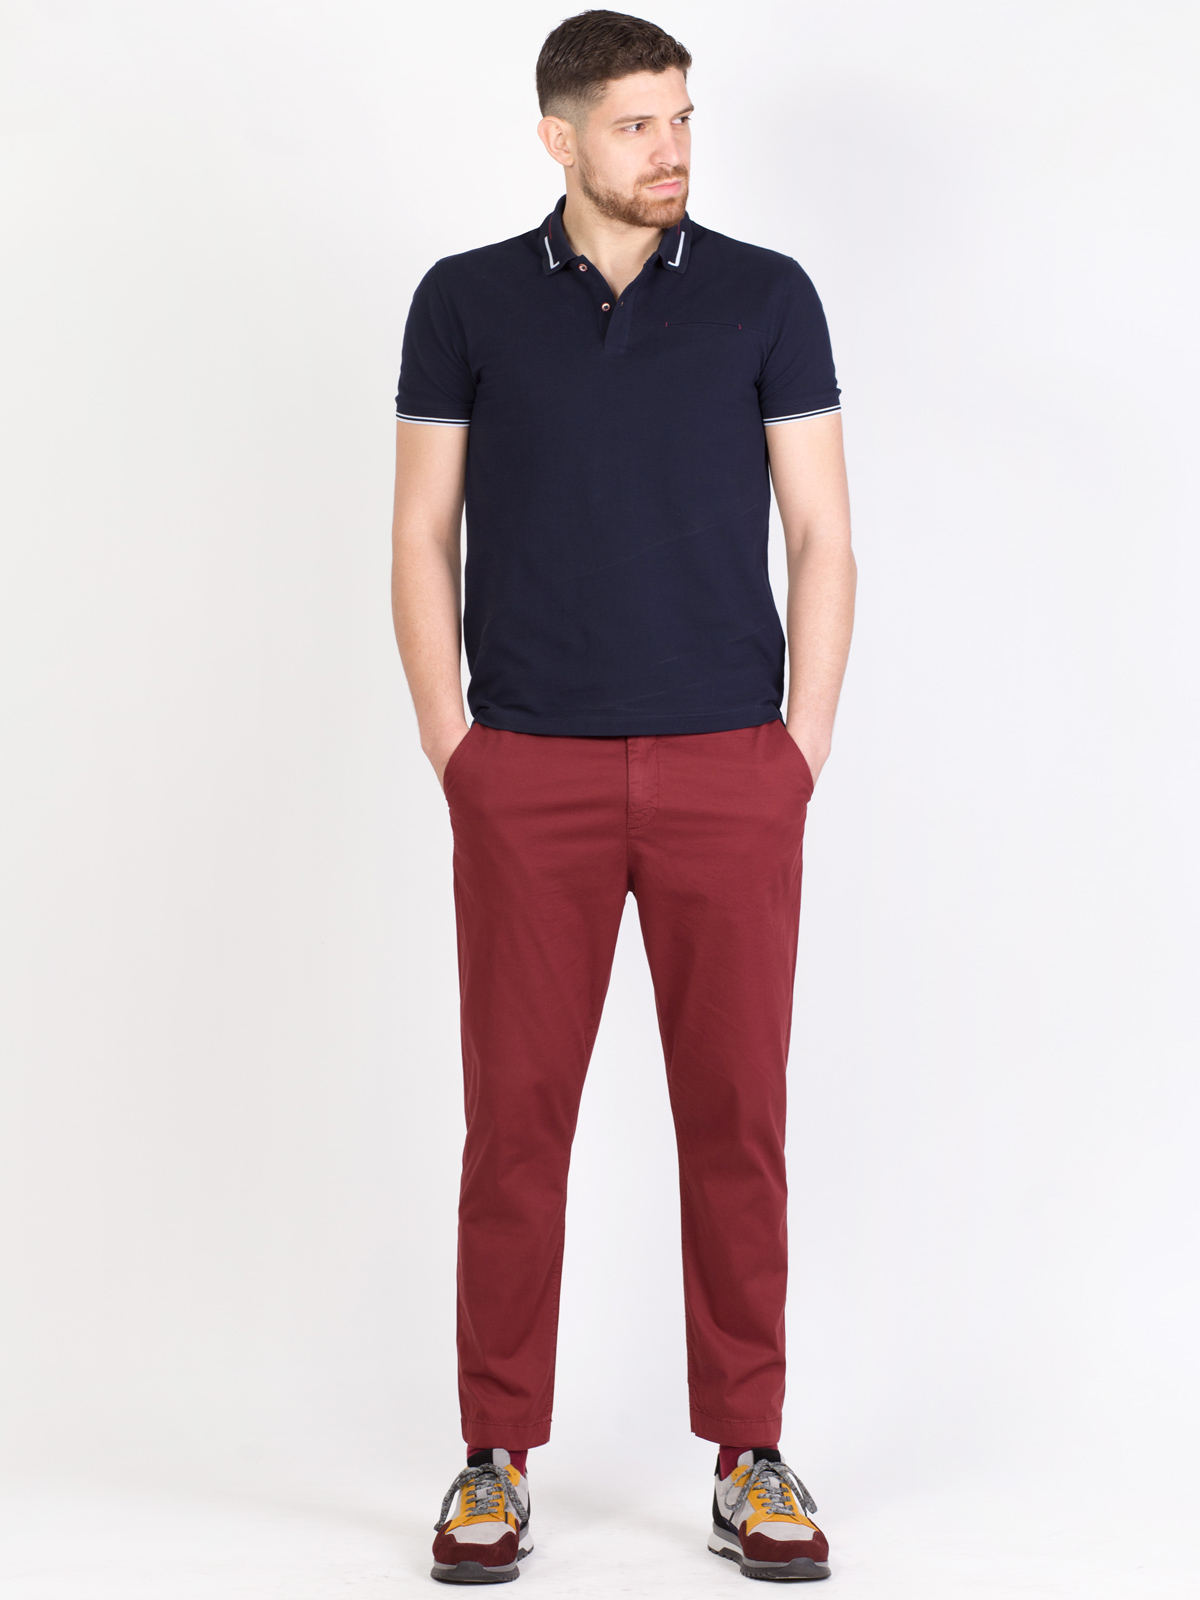 Pants in burgundy with a straight silho - 63308 € 24.75 img4